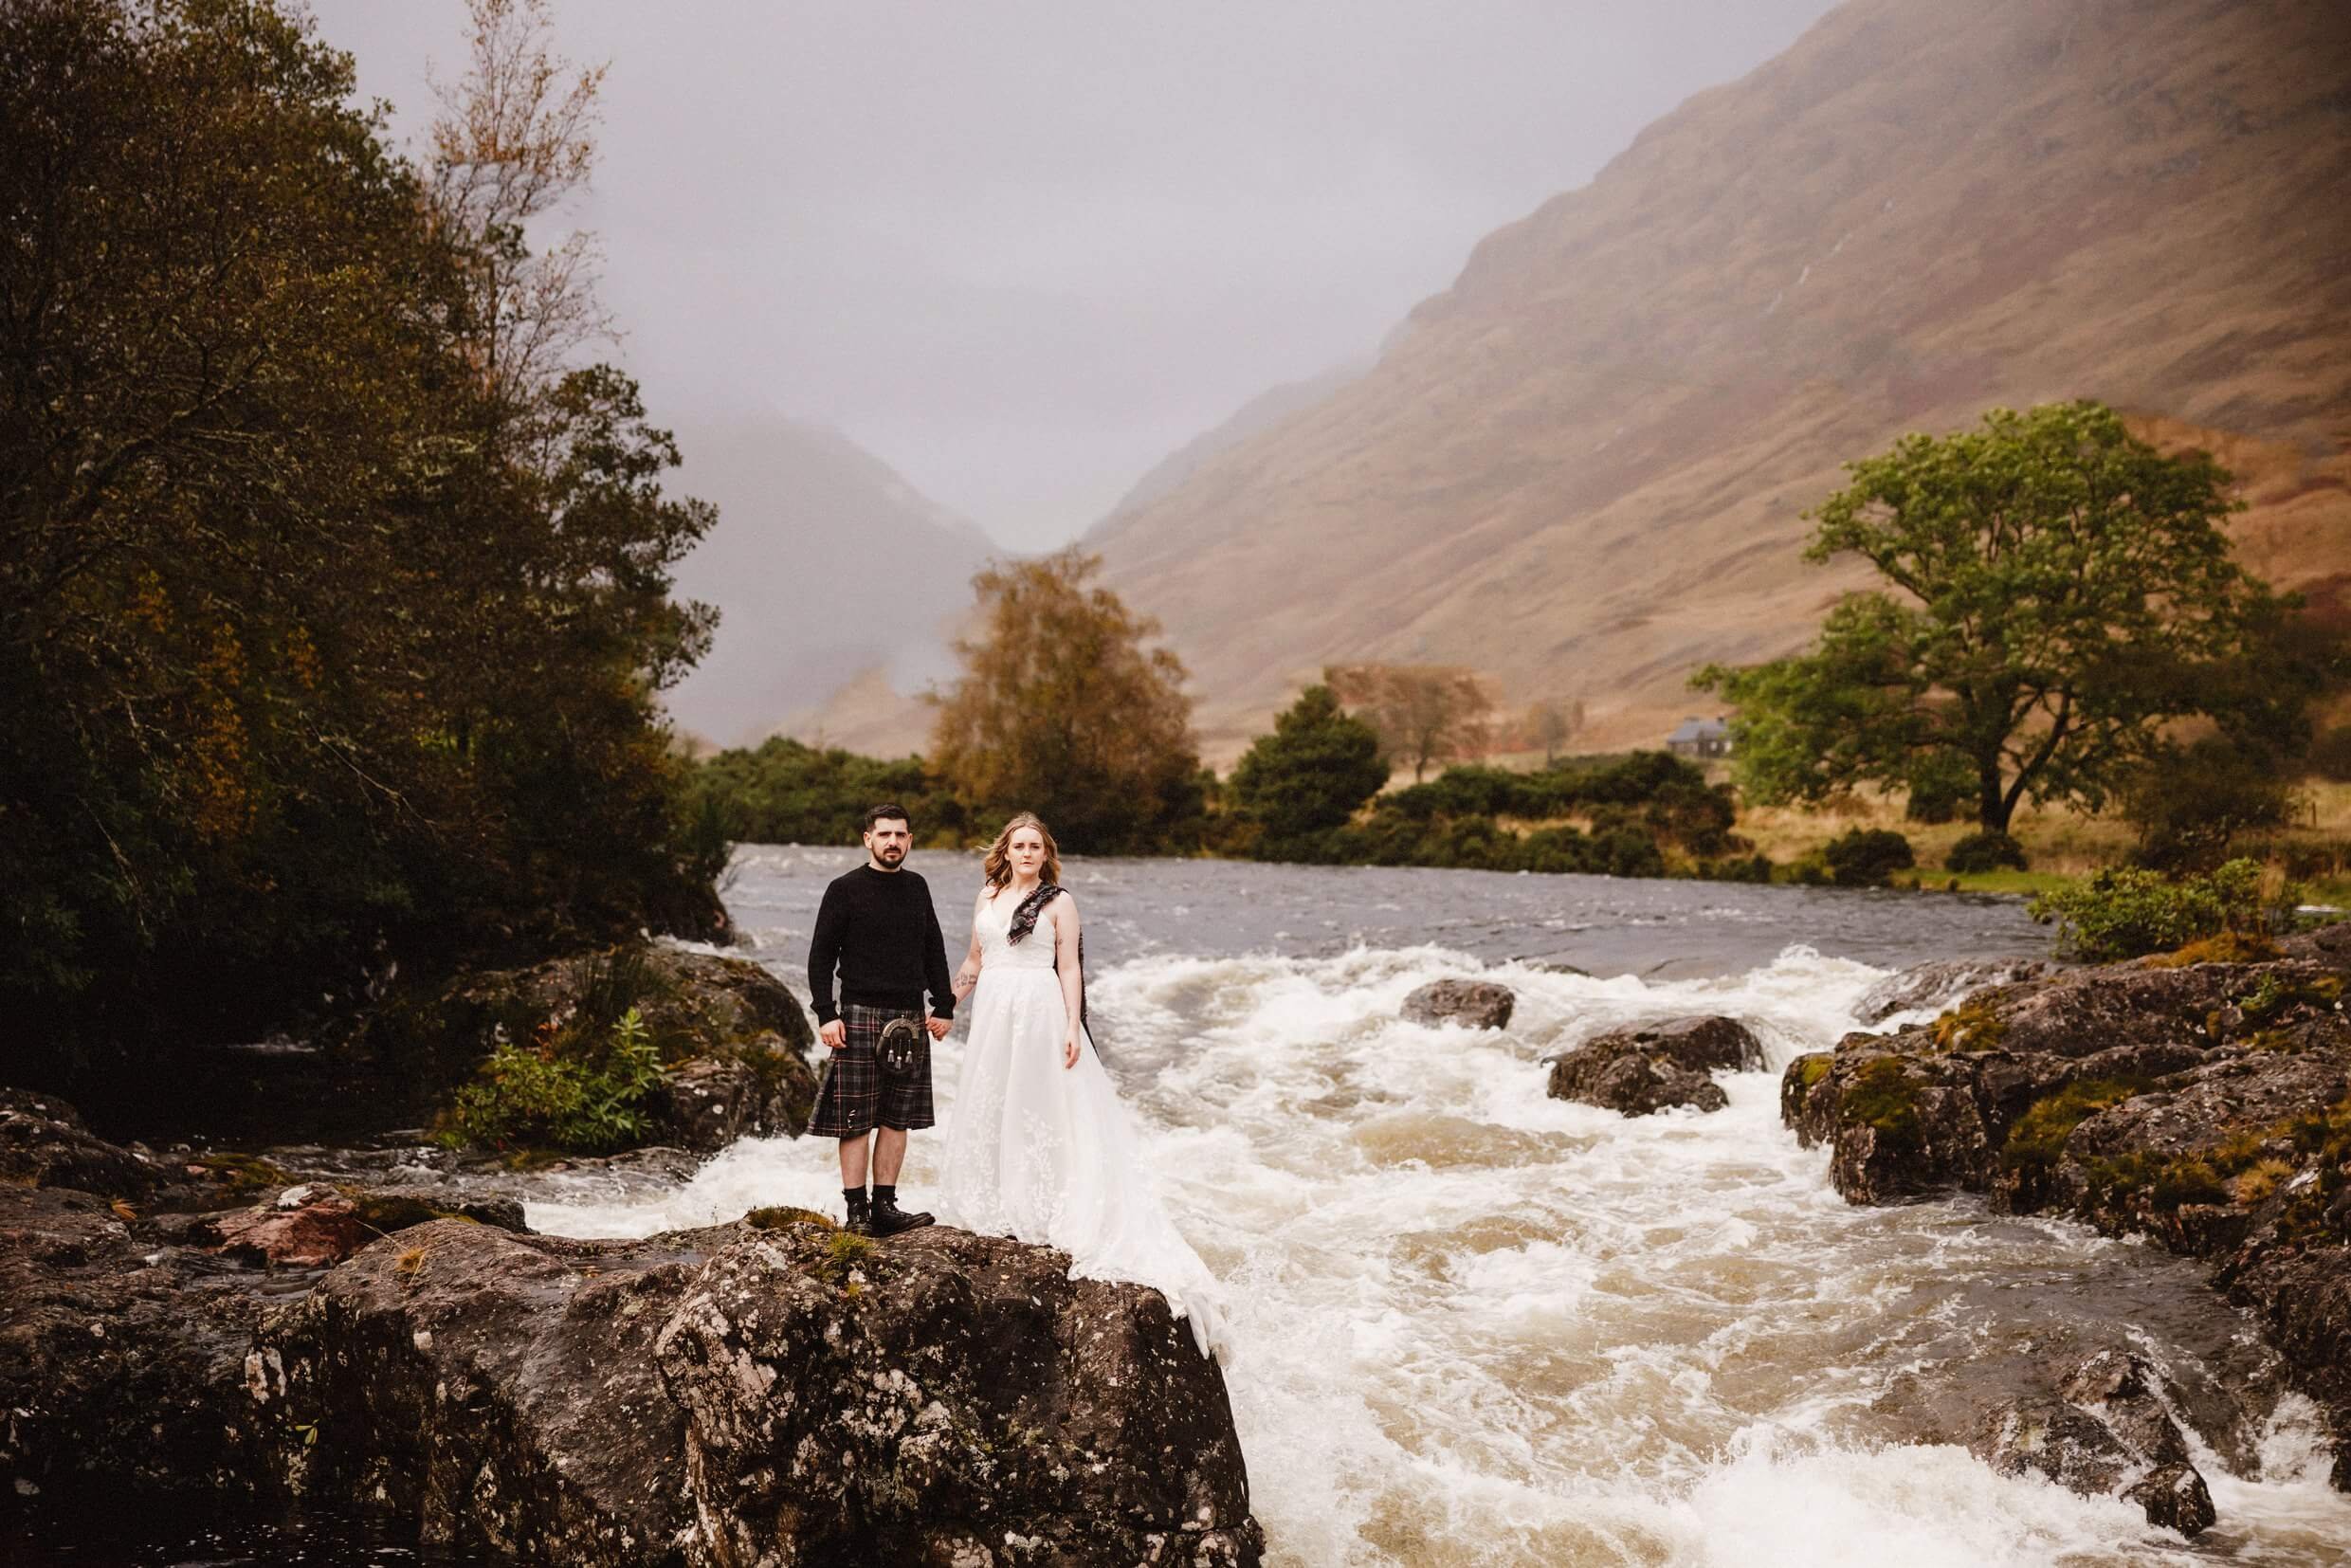 bride and groom stand next to river etive in glen etive following their glencoe elopement wedding ceremony in scotland